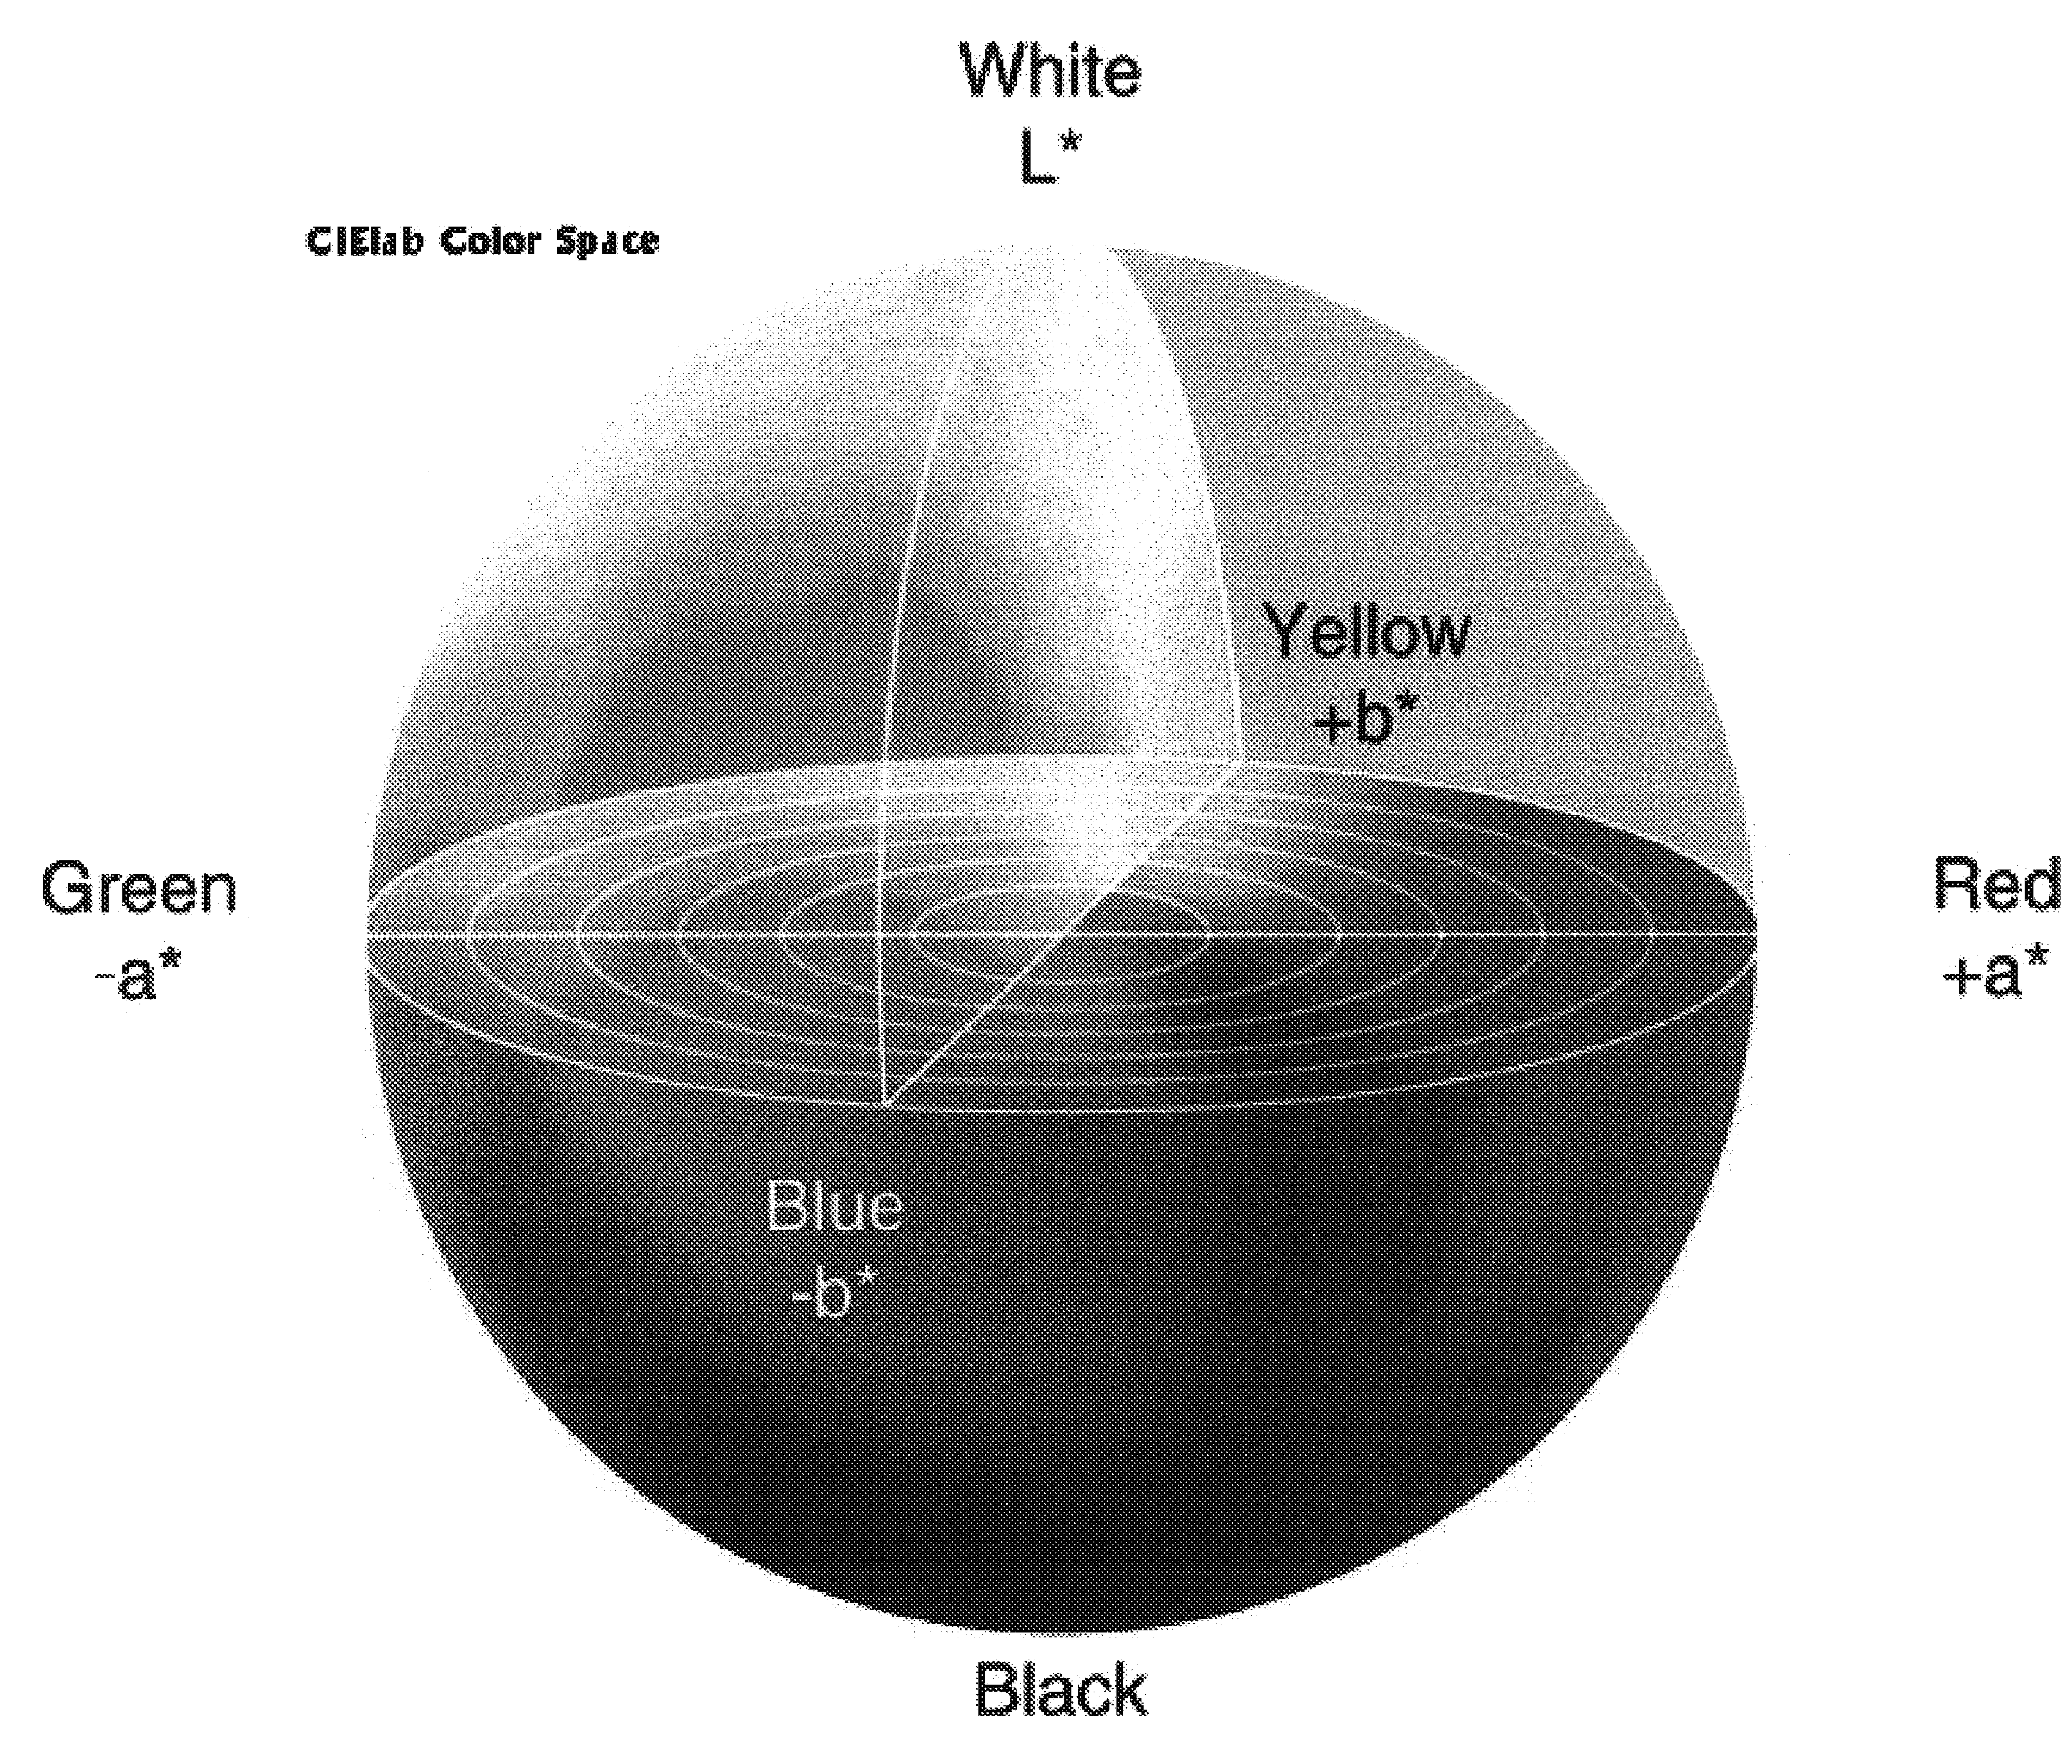 Method for generating customized ink/media transforms